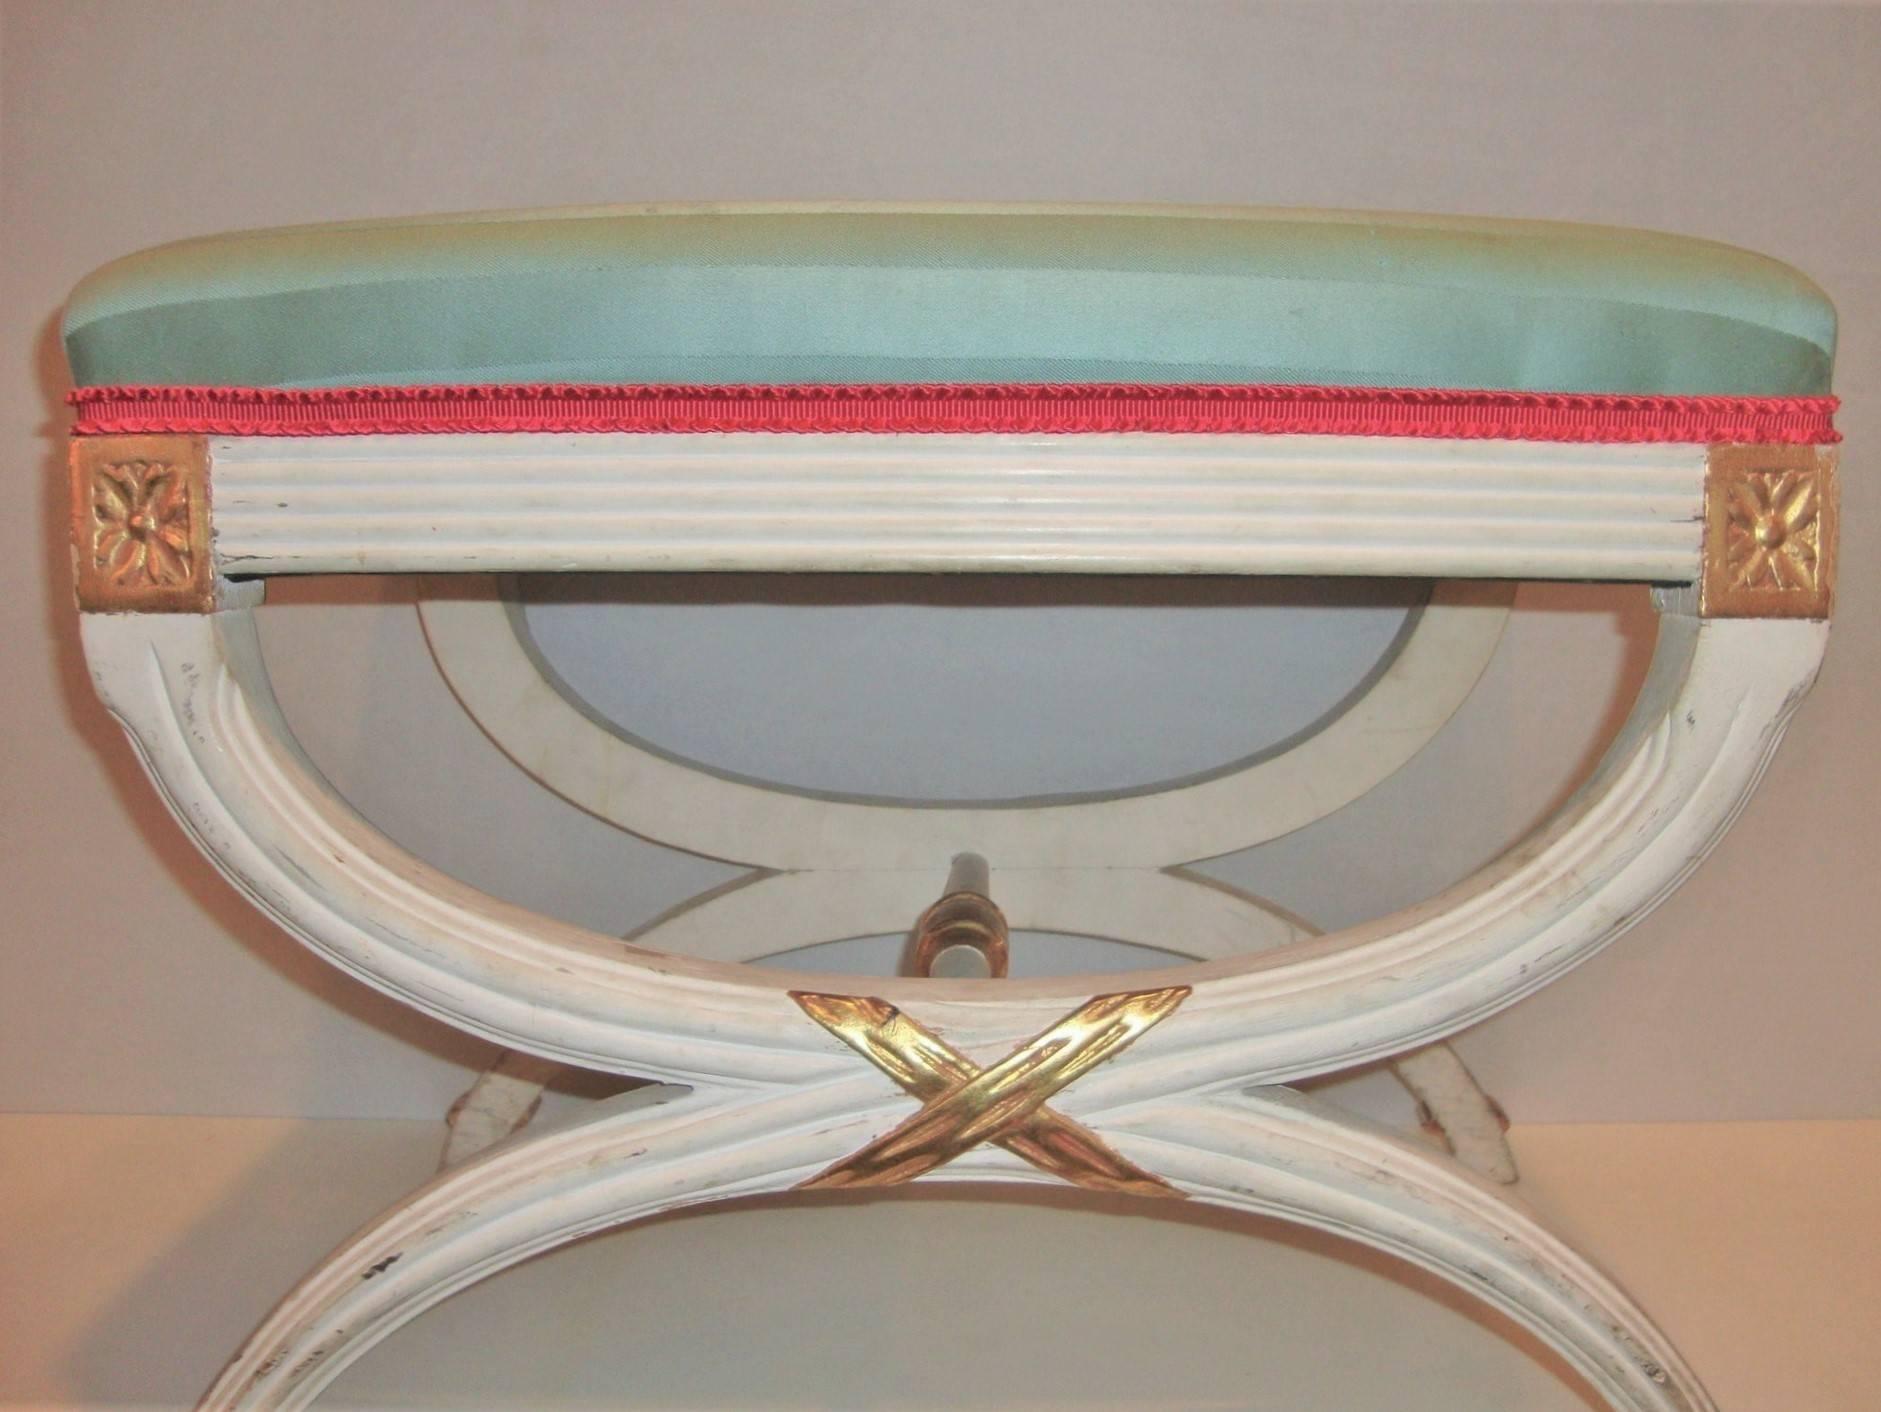 20th Century Hollywood Regency Paint Decorated “X” Form Bench or Footstool